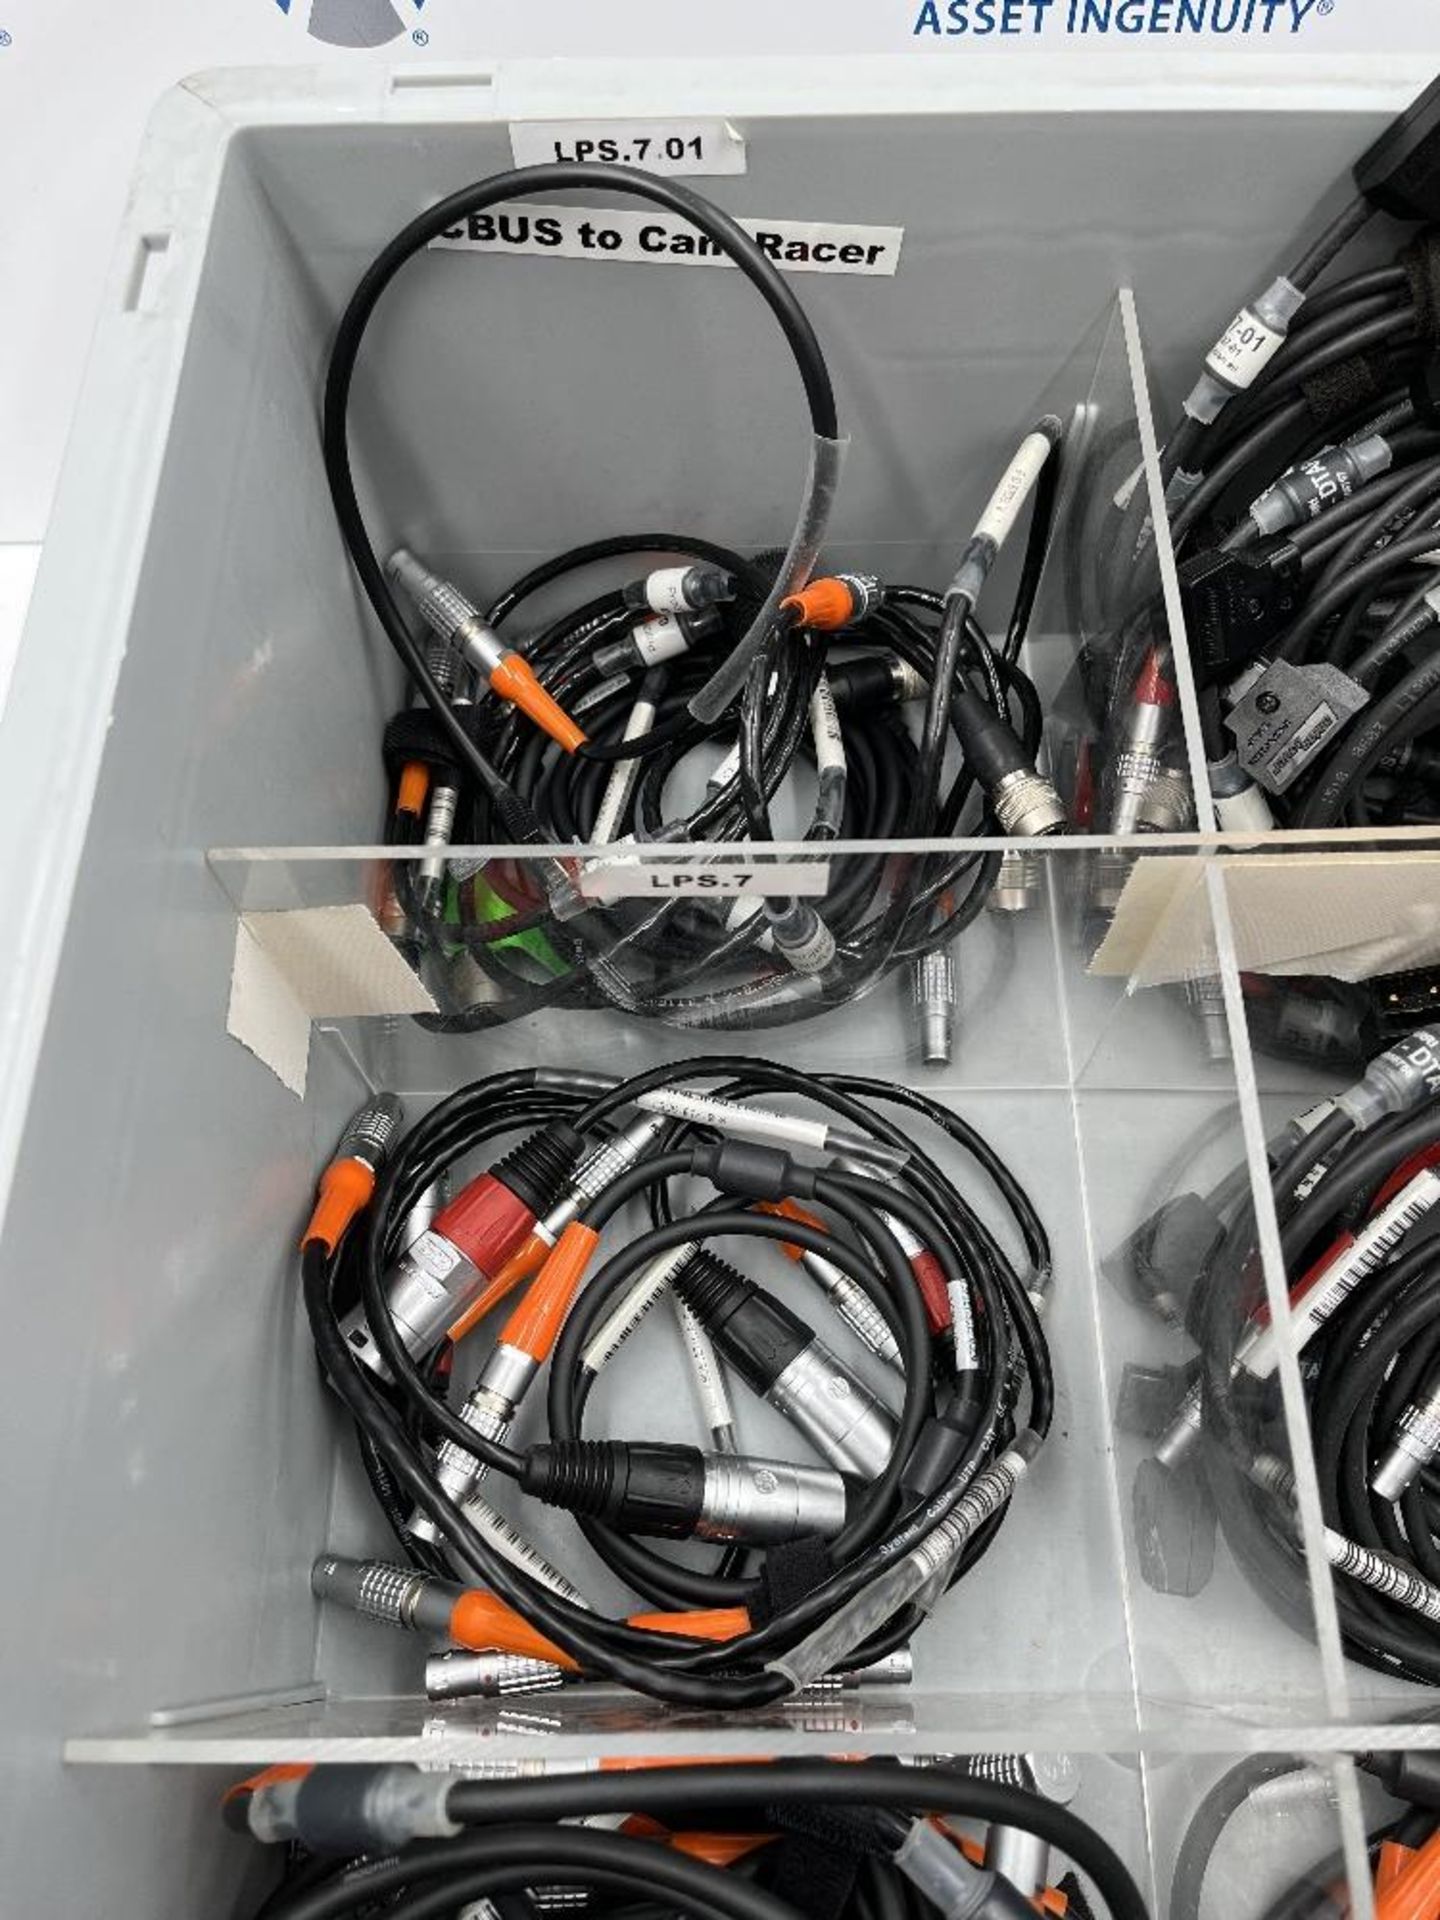 Quantity of CBUS to Cam Racer, LPS & CCB Cables - Image 5 of 7